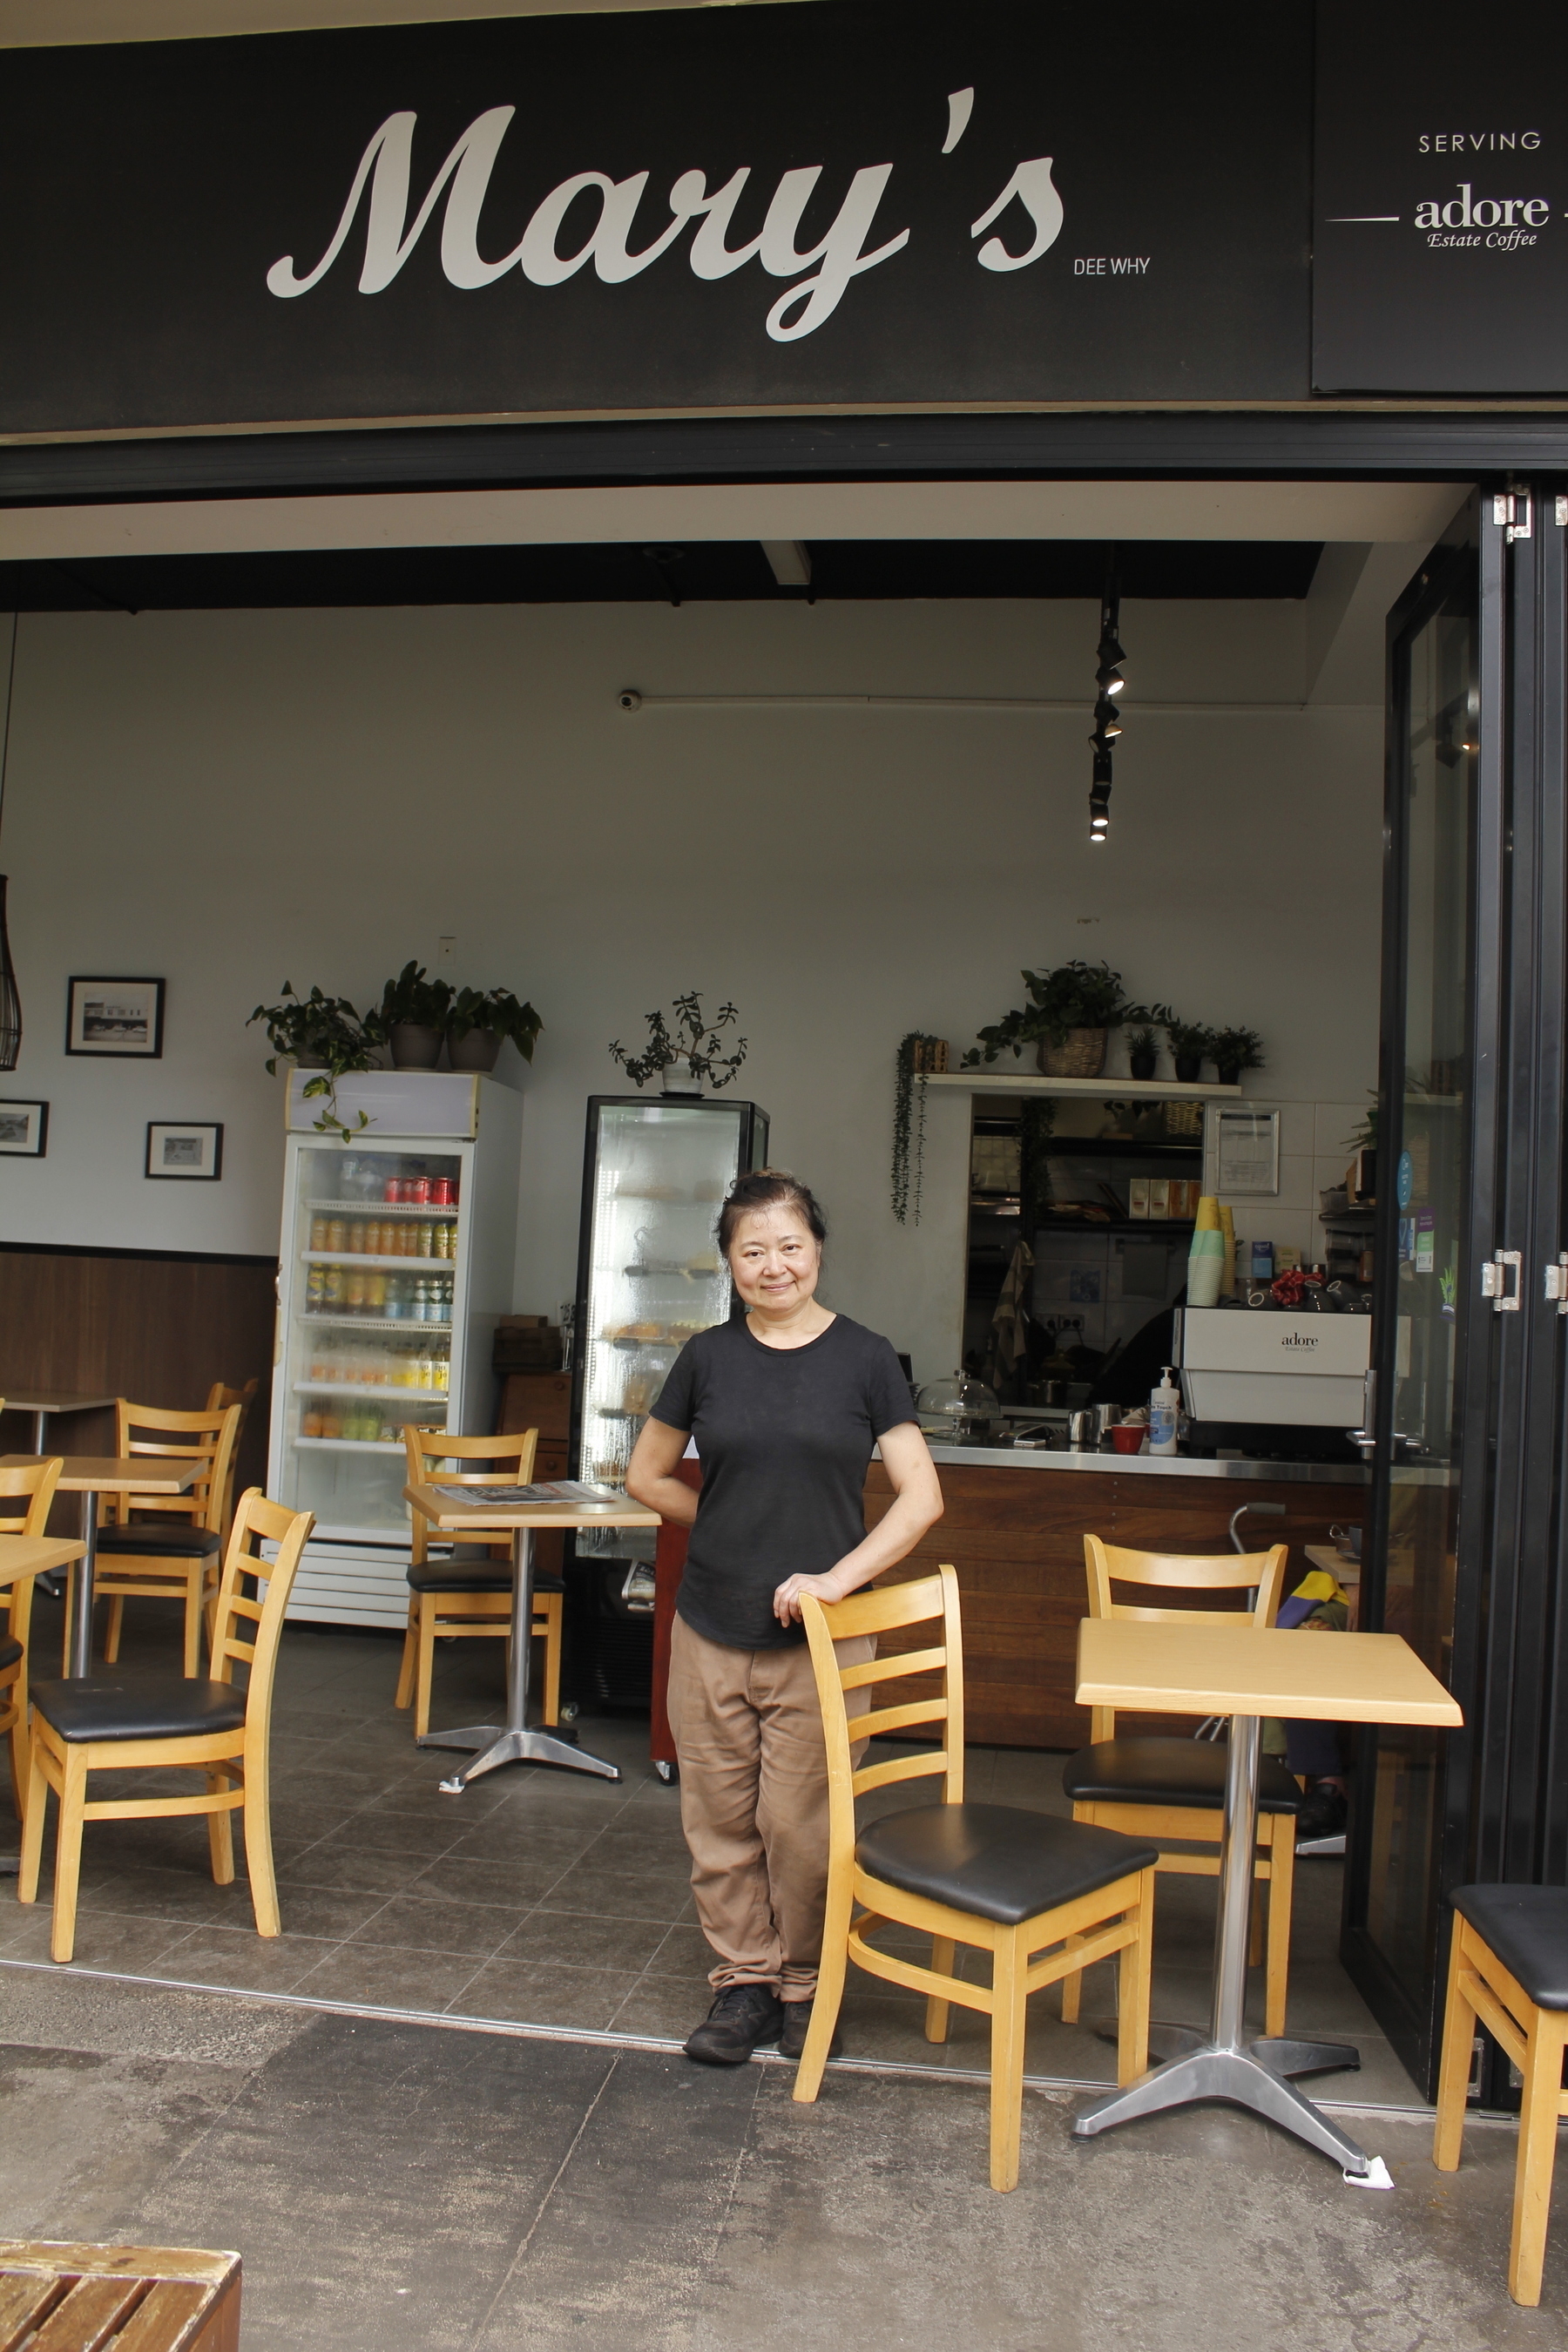 A woman stands just inside an open-fronted cafe, resting one hand on the back of a chair and smiling at the camera. She wears a black t-shirt, brown trousers and dark brown boots, and has one knee bent. Inside the cafe are tables and chairs, two tall fridges against the far wall, the serving counter and, behind it, a doorway leading into the kitchen. The floor is tiled, and glass doors are folded back against the right-hand side. A sign above the entrance says “Mary’s Dee Why” and “Serving Adore Estate Coffee”.